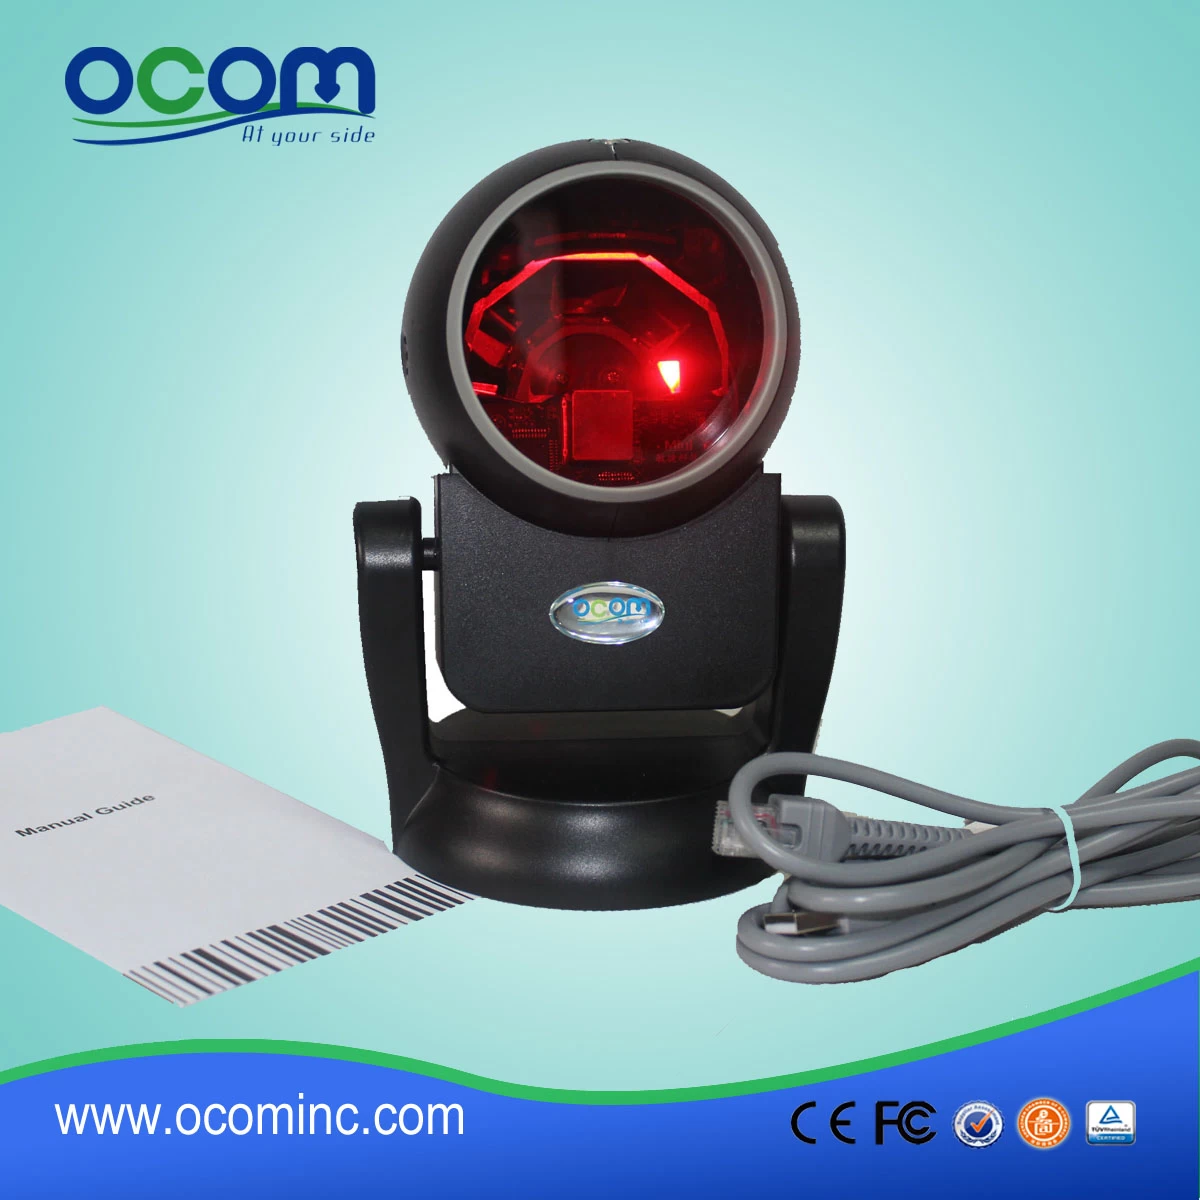 Multi-Line Omni-Directional Barcode Scanners OCBS-T007